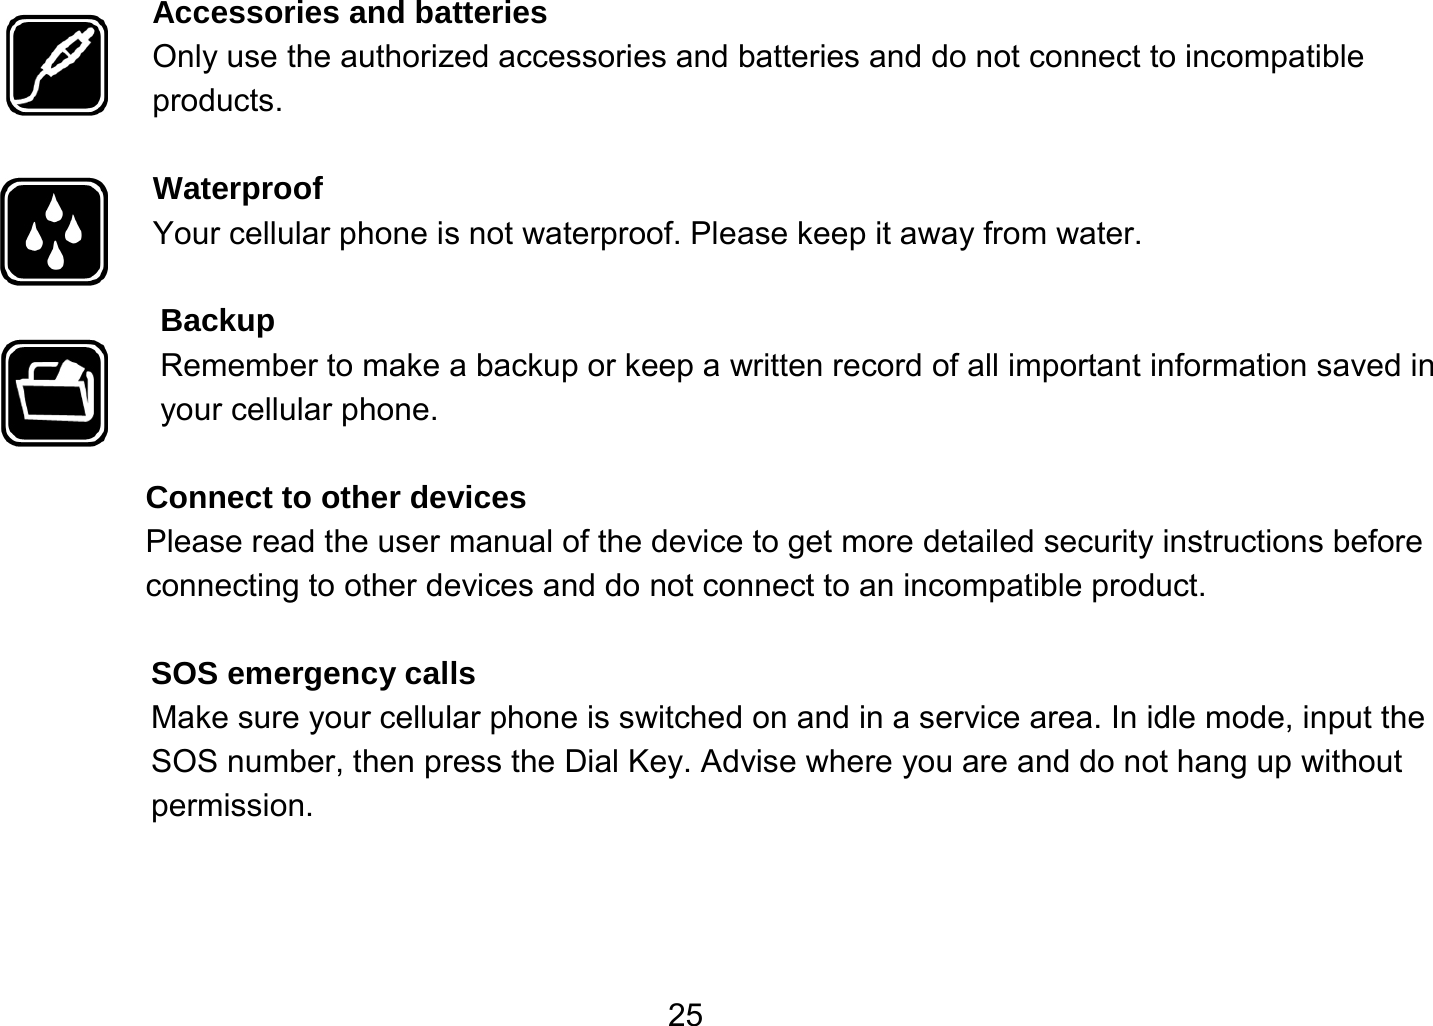   25Accessories and batteries Only use the authorized accessories and batteries and do not connect to incompatible products.  Waterproof Your cellular phone is not waterproof. Please keep it away from water.  Backup Remember to make a backup or keep a written record of all important information saved in your cellular phone.  Connect to other devices Please read the user manual of the device to get more detailed security instructions before connecting to other devices and do not connect to an incompatible product.  SOS emergency calls Make sure your cellular phone is switched on and in a service area. In idle mode, input the SOS number, then press the Dial Key. Advise where you are and do not hang up without permission. 